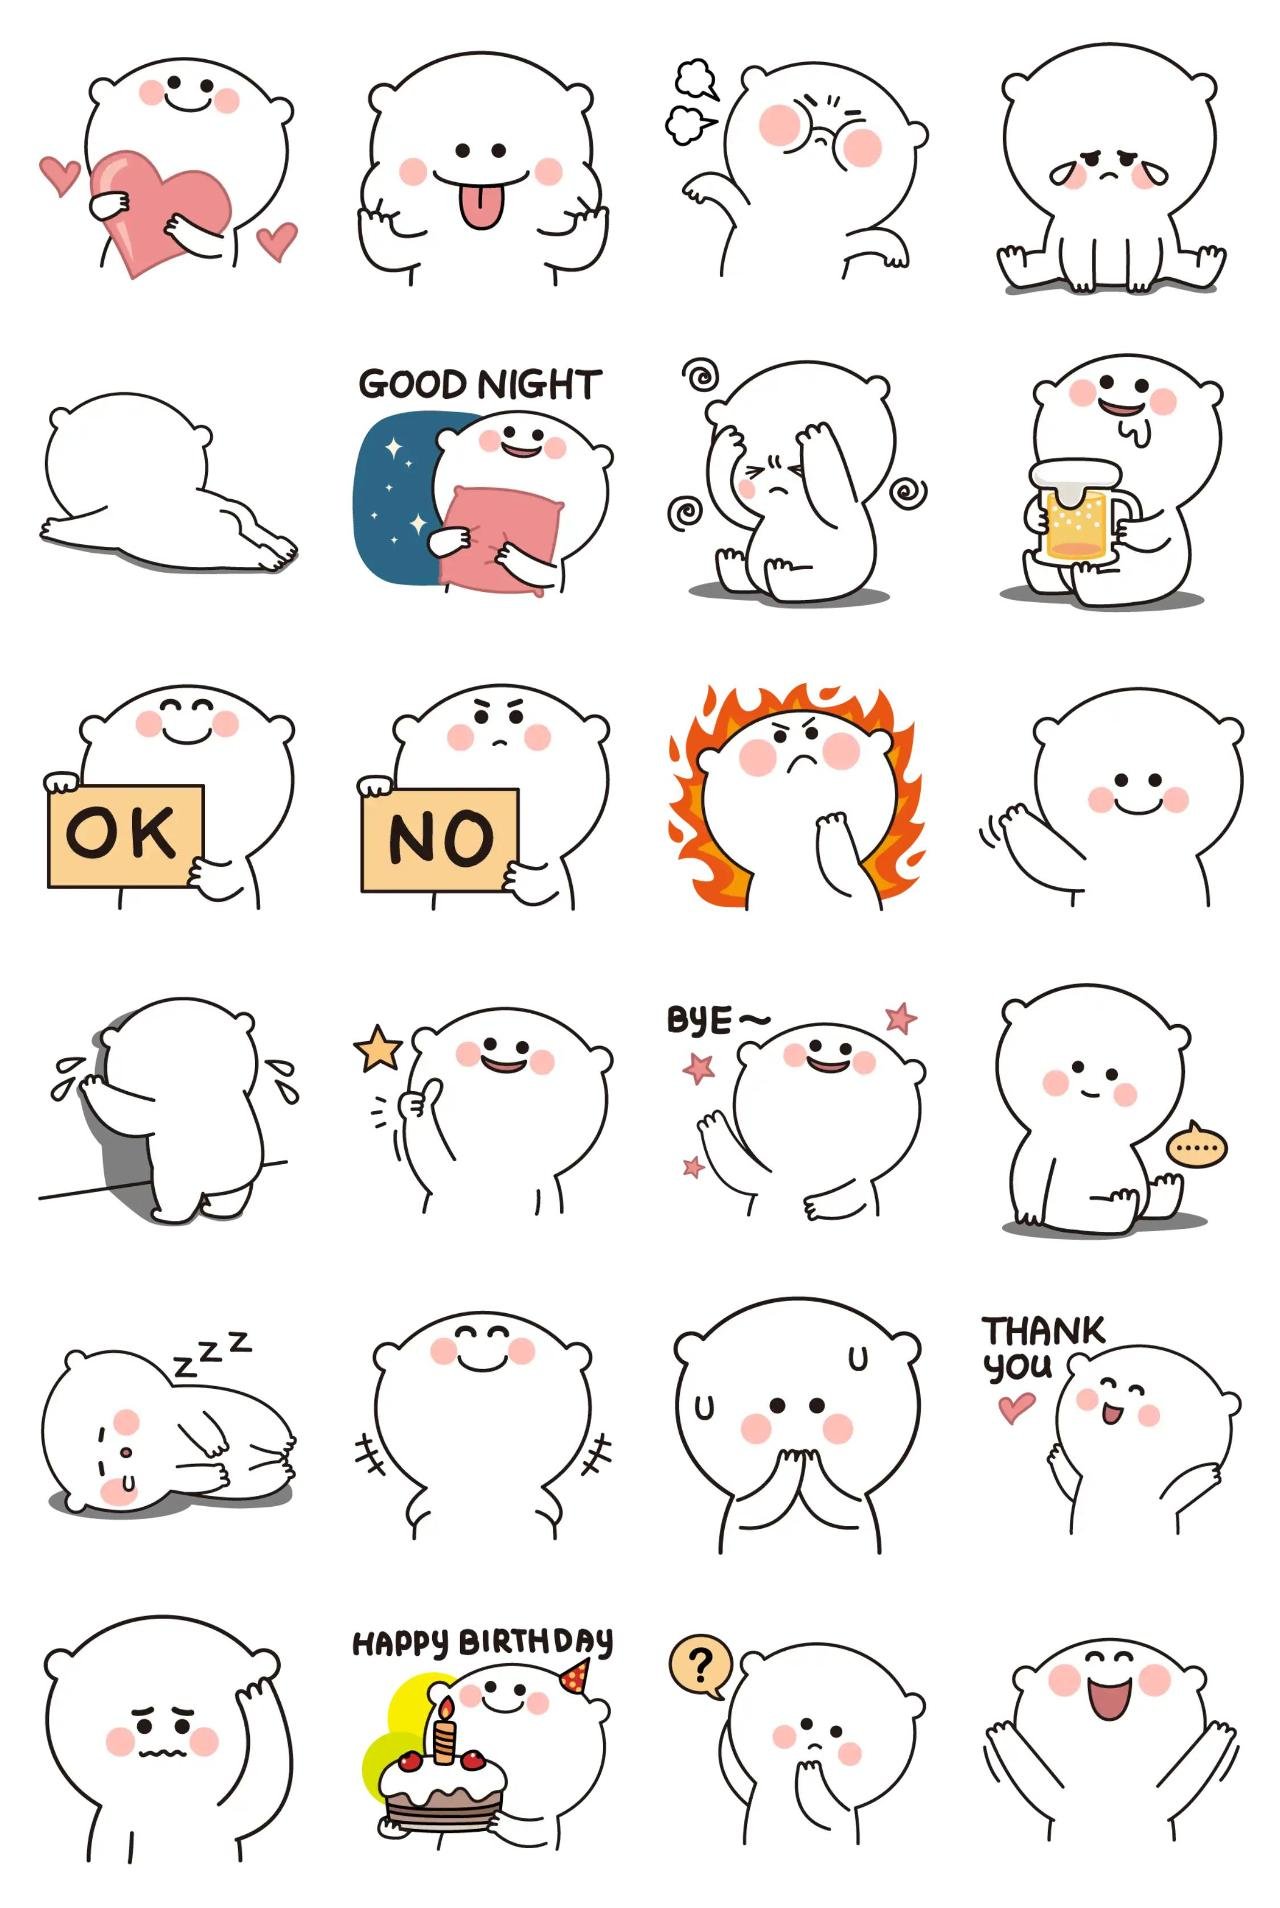 White Bear Animals,Gag sticker pack for Whatsapp, Telegram, Signal, and others chatting and message apps